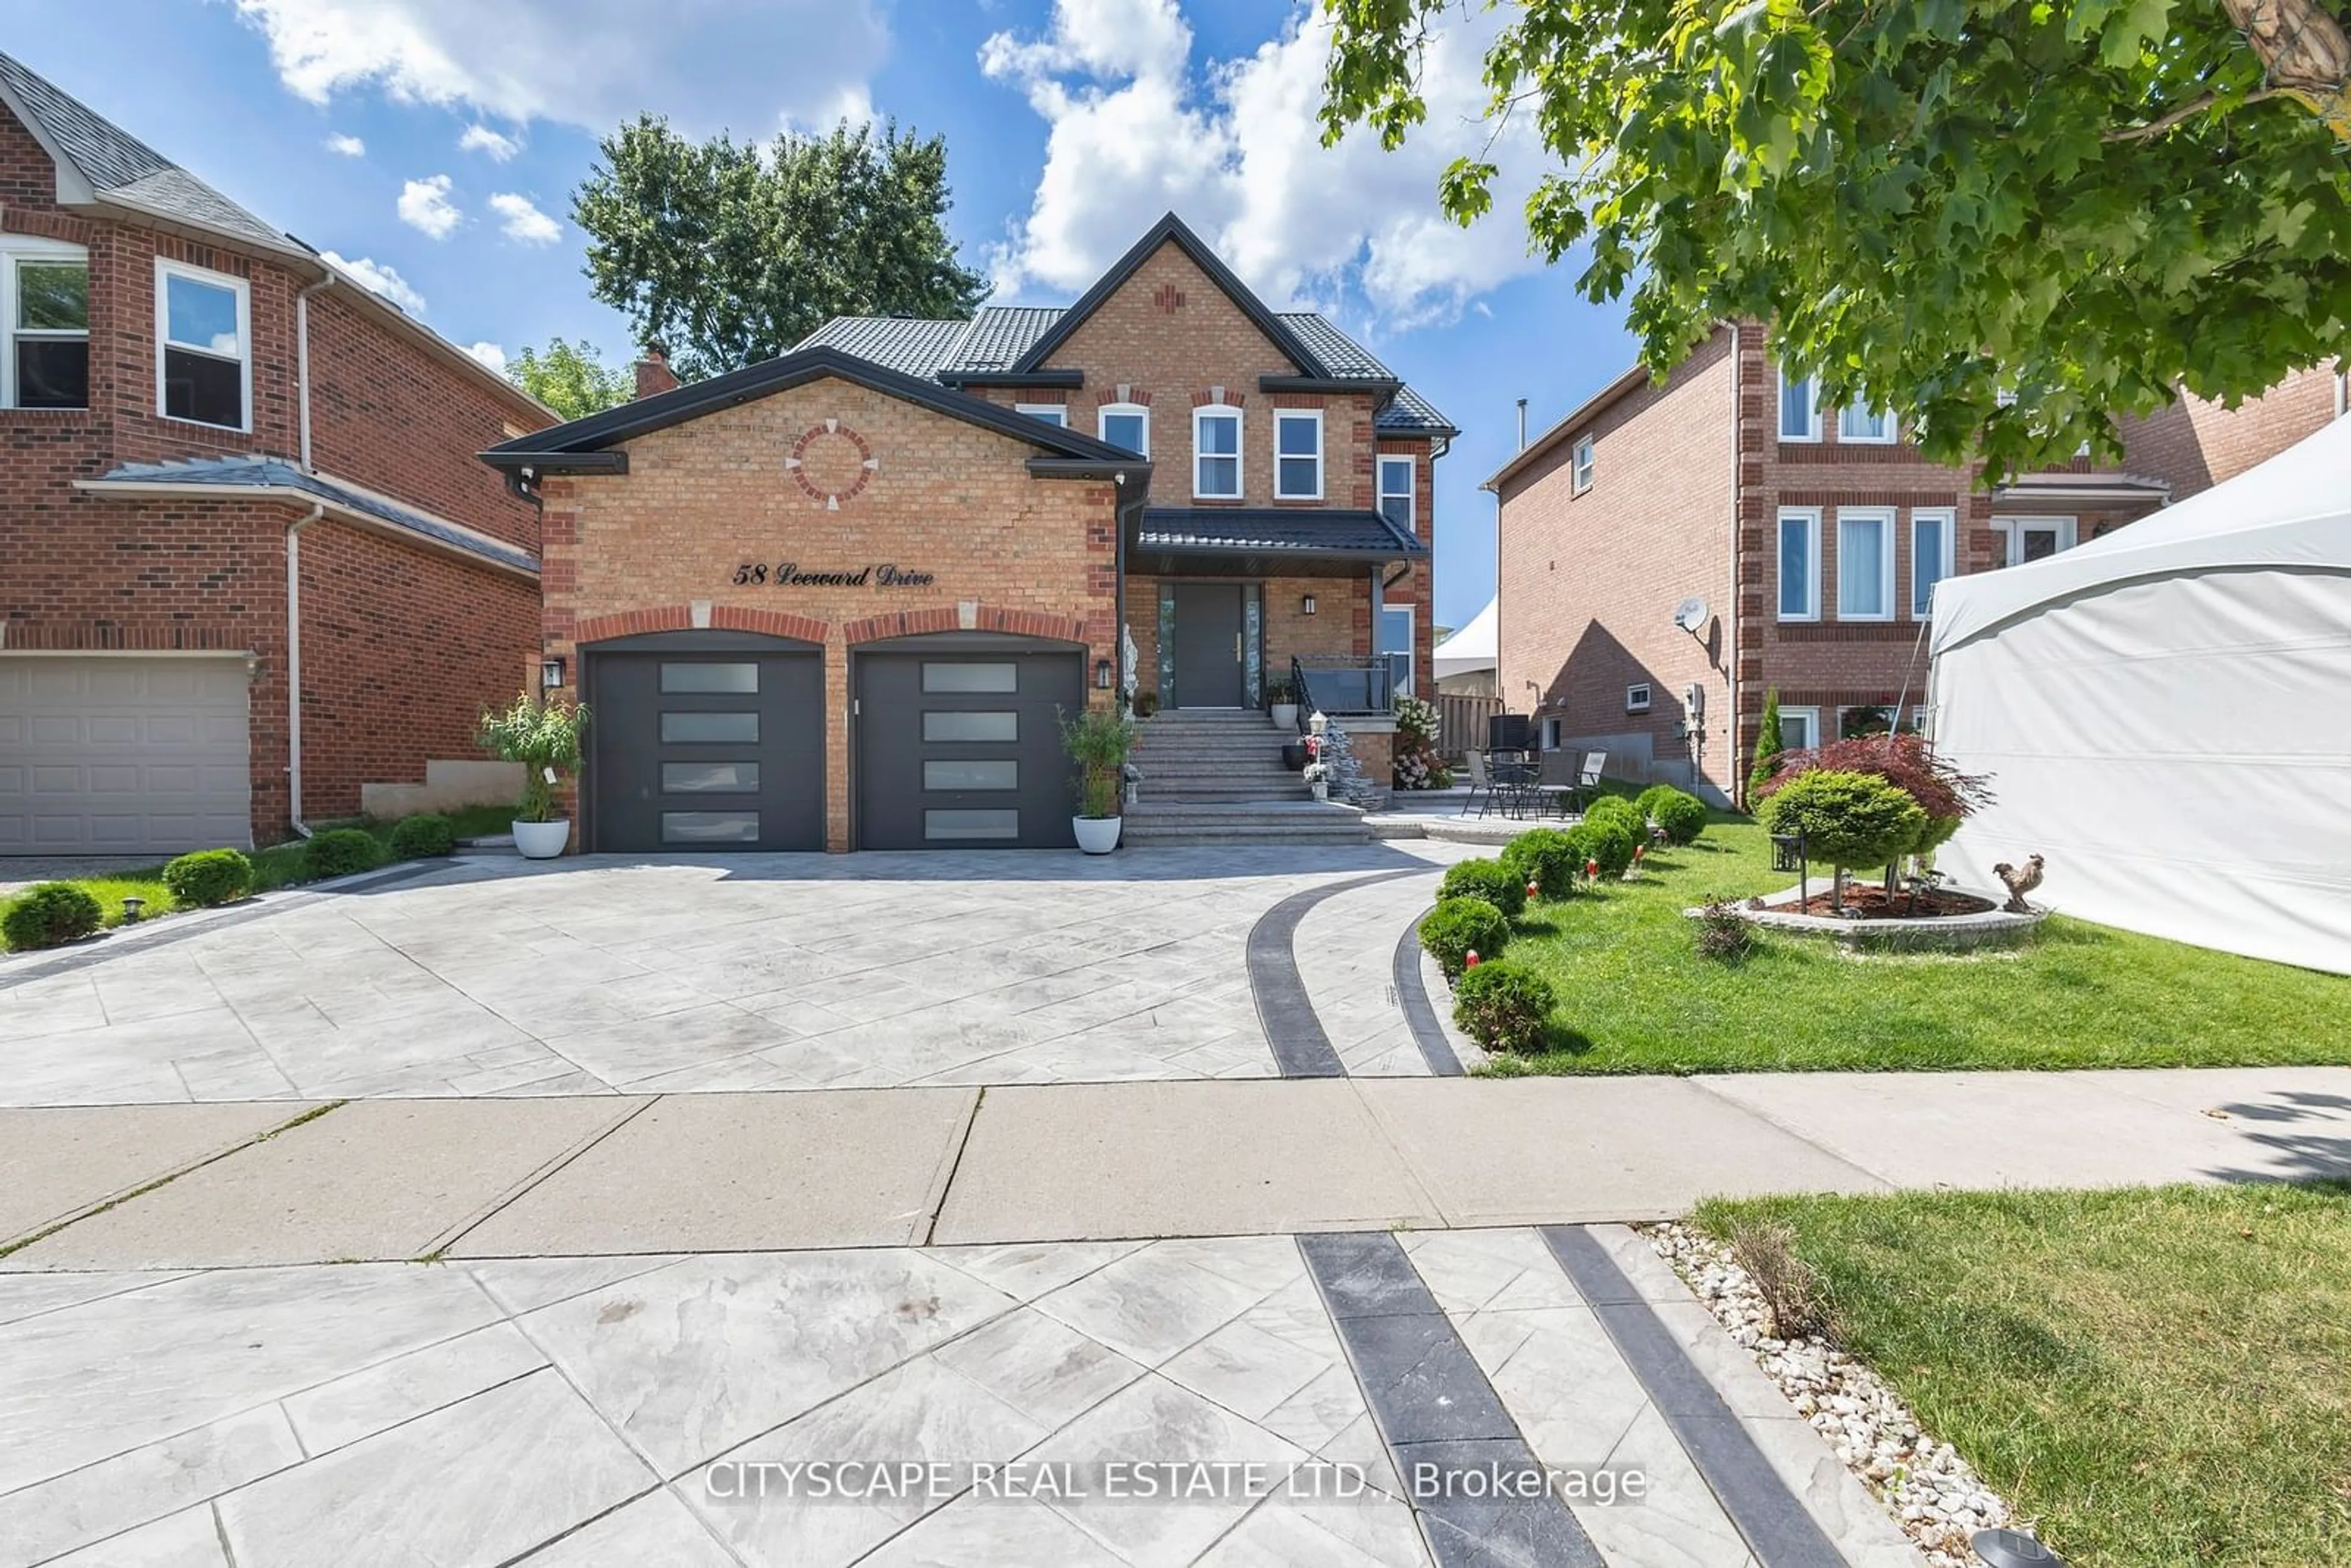 Home with brick exterior material for 58 Leeward Dr, Brampton Ontario L6S 5V8